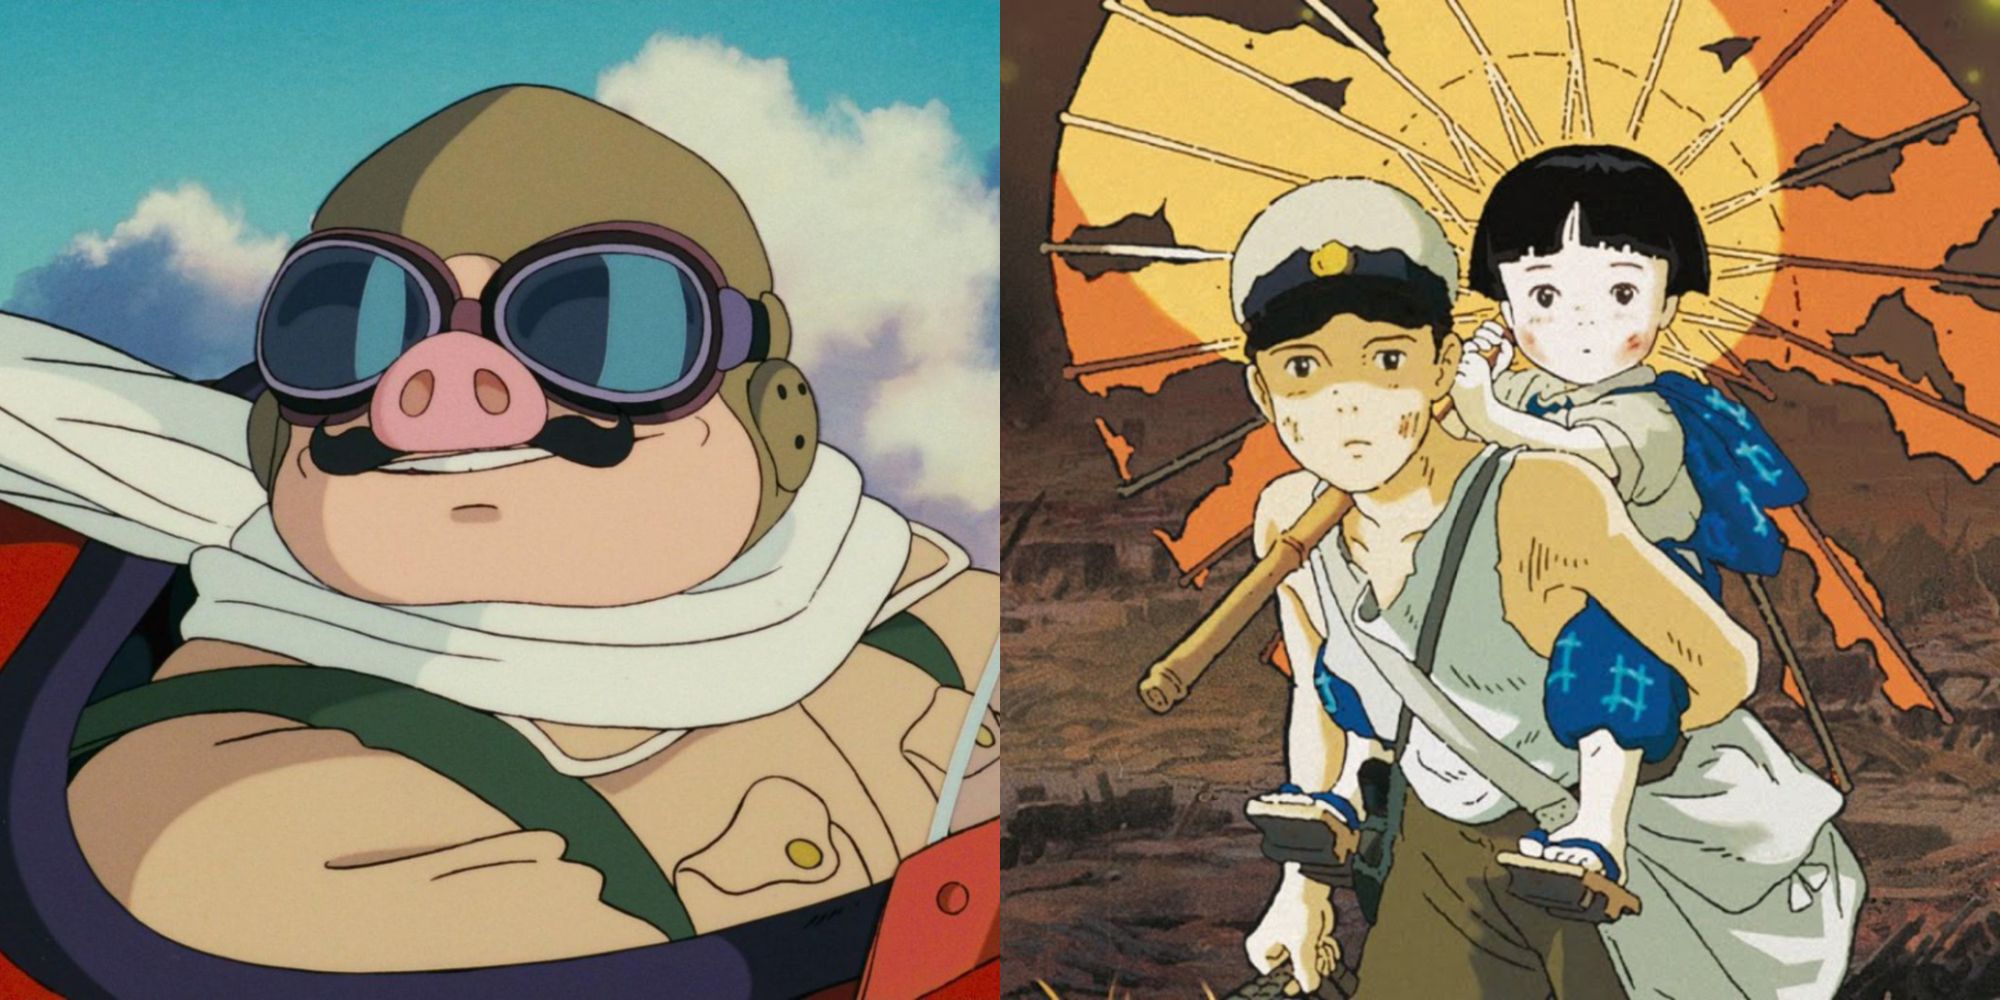 Split image showing Porco Rosso and Seita and Setsuko from Grave of the Fireflies.